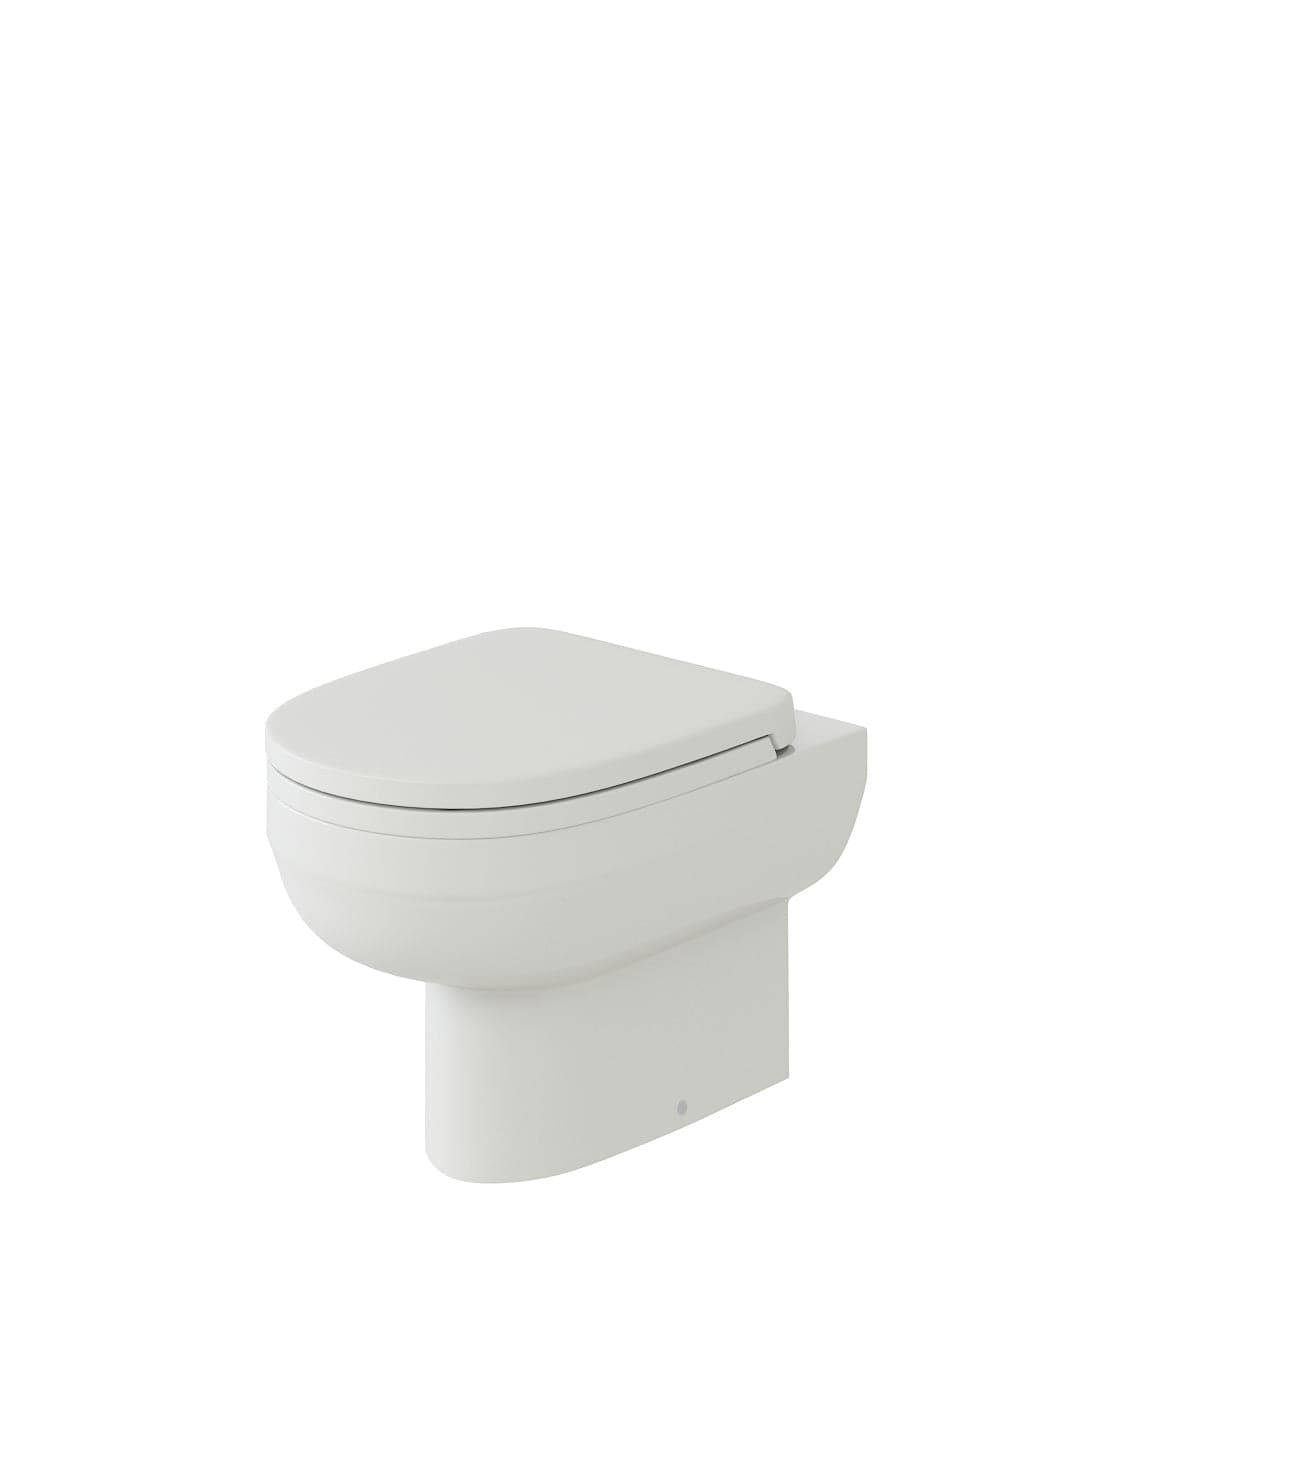 Gamma L Shape Vanity & WC Unit - LH - Gloss White. Stylish bathroom furniture with WC unit, ideal for modern UK homes.